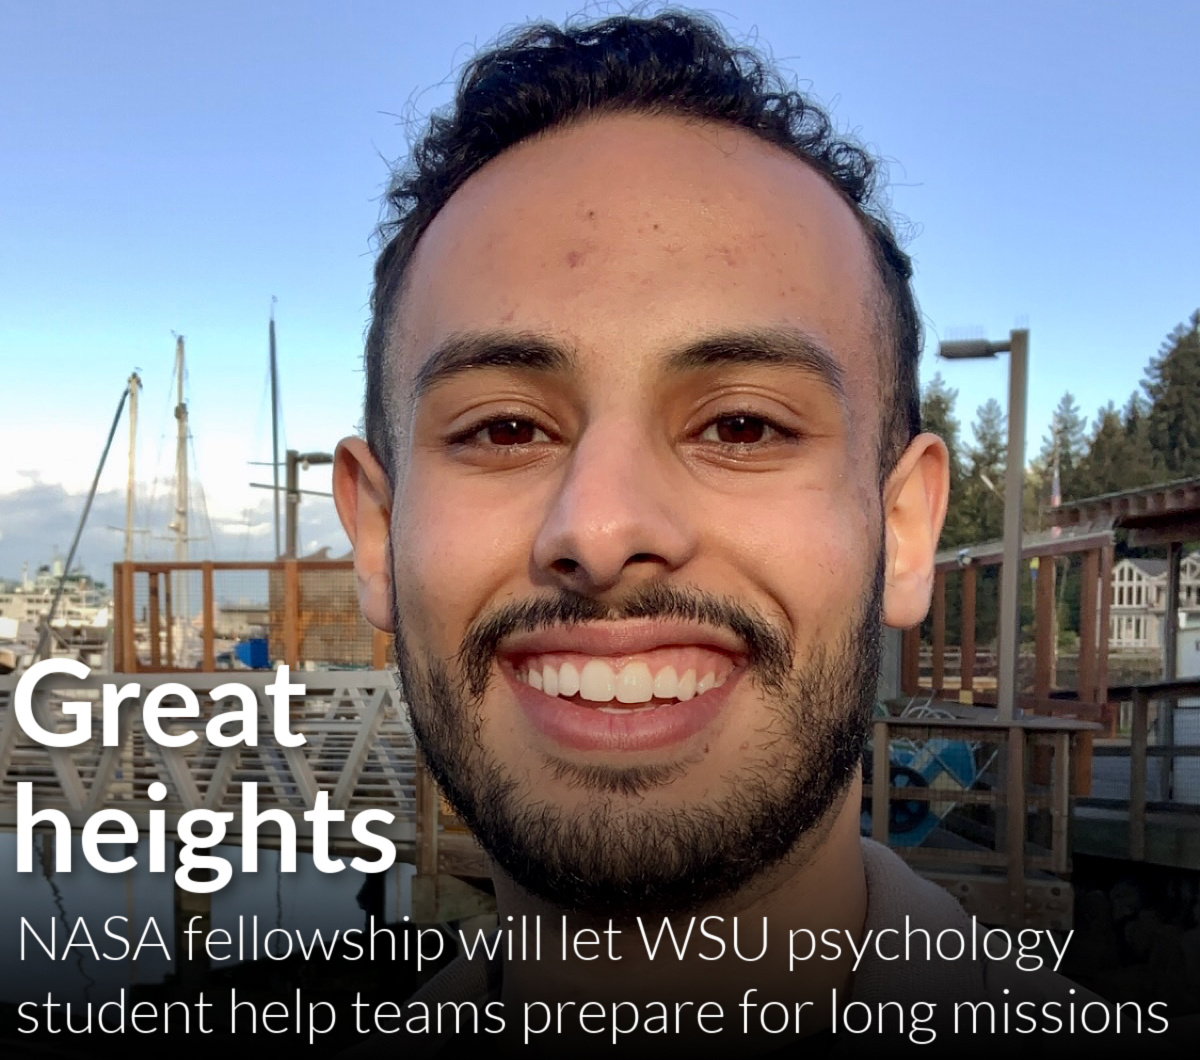 NASA fellowship will allow WSU psychology student to help teams prepare for long-term missions